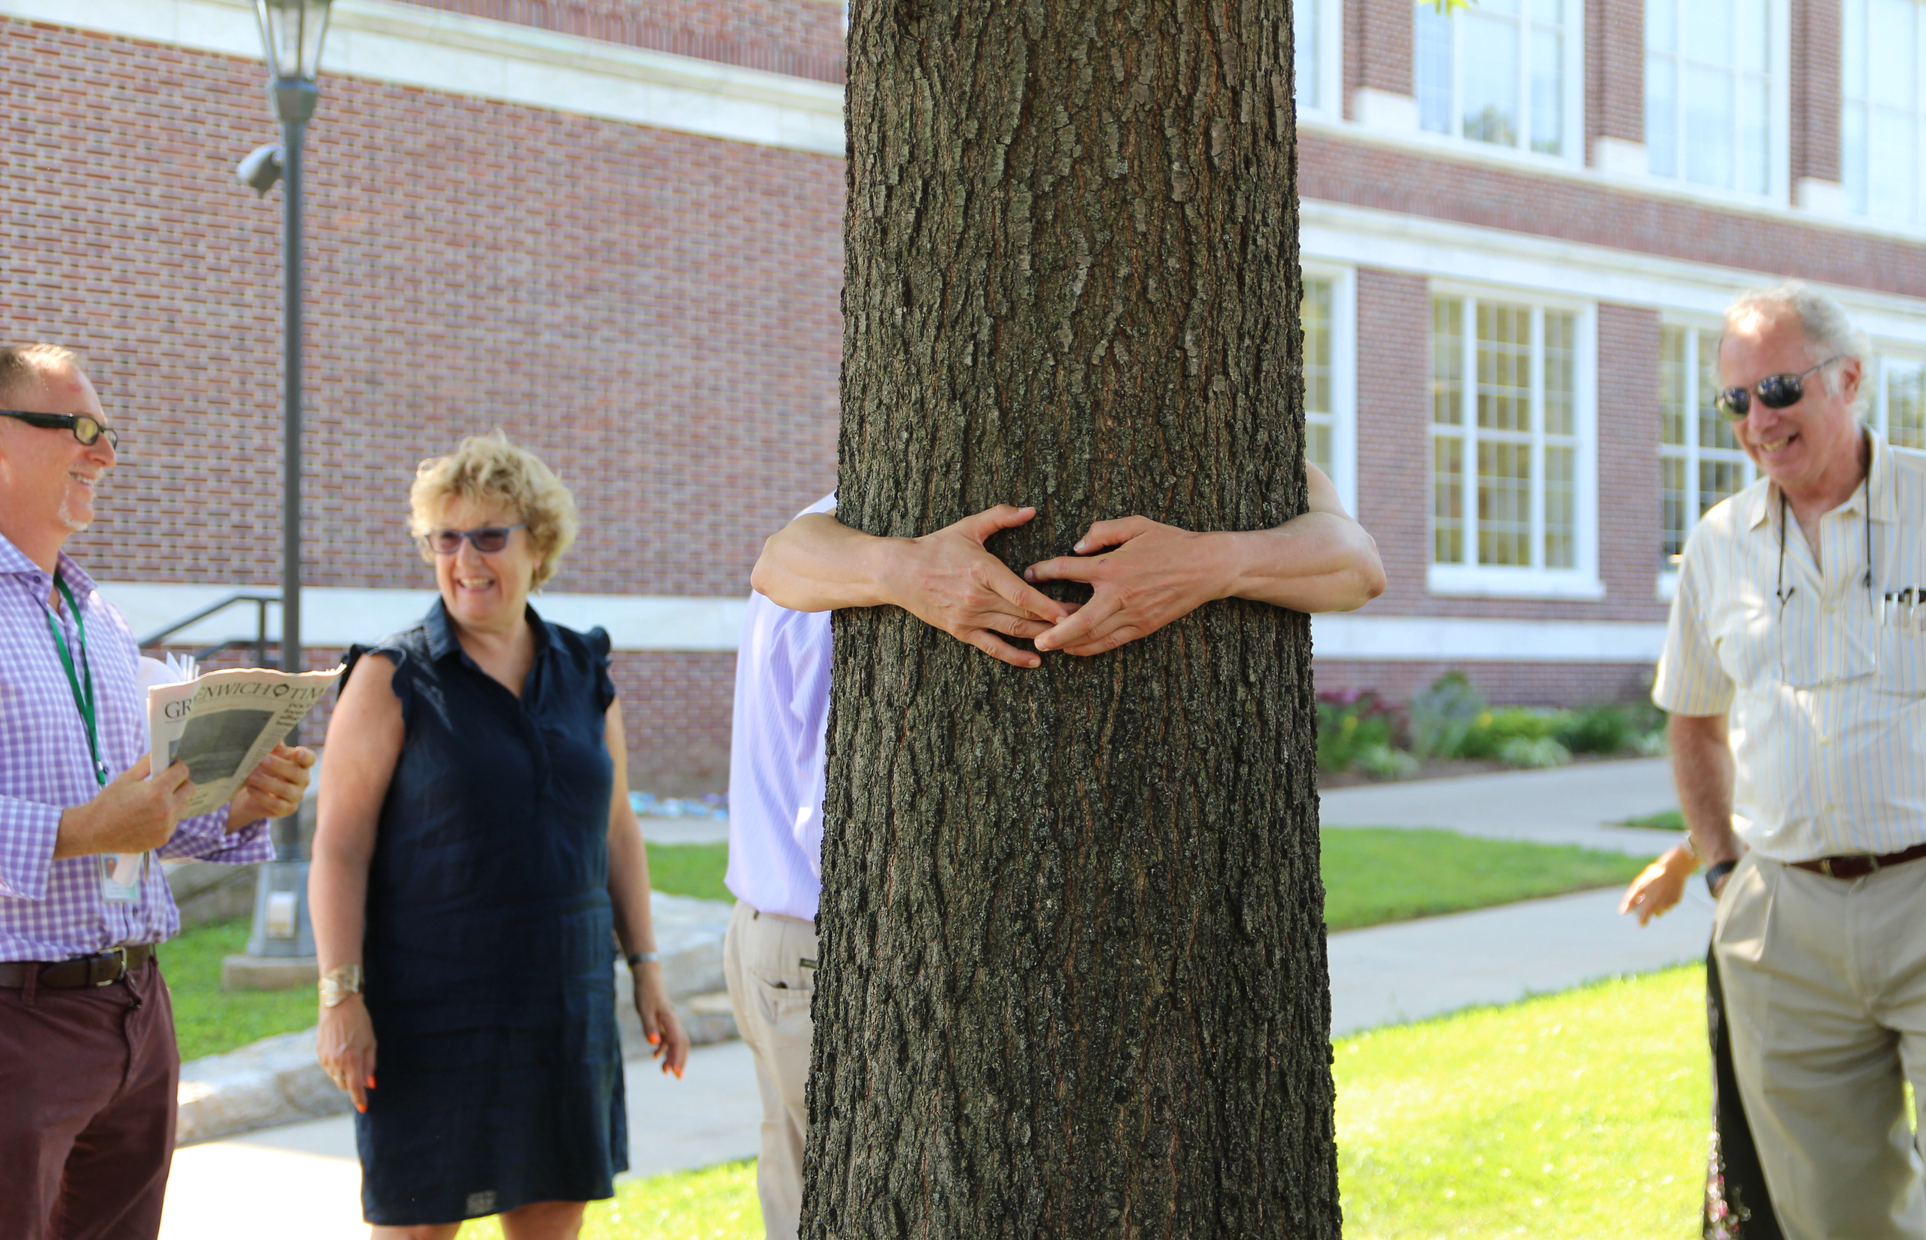 Town of Greenwich Superintendent of Parks & Trees Dr. Greg Kramer, executive Director of Greenwich Tree Conservancy JoAnn Messina and GTC Mark Greenwald look on as someone hugs the pin oak tree at Greenwich Town hall, Aug 15, 2019